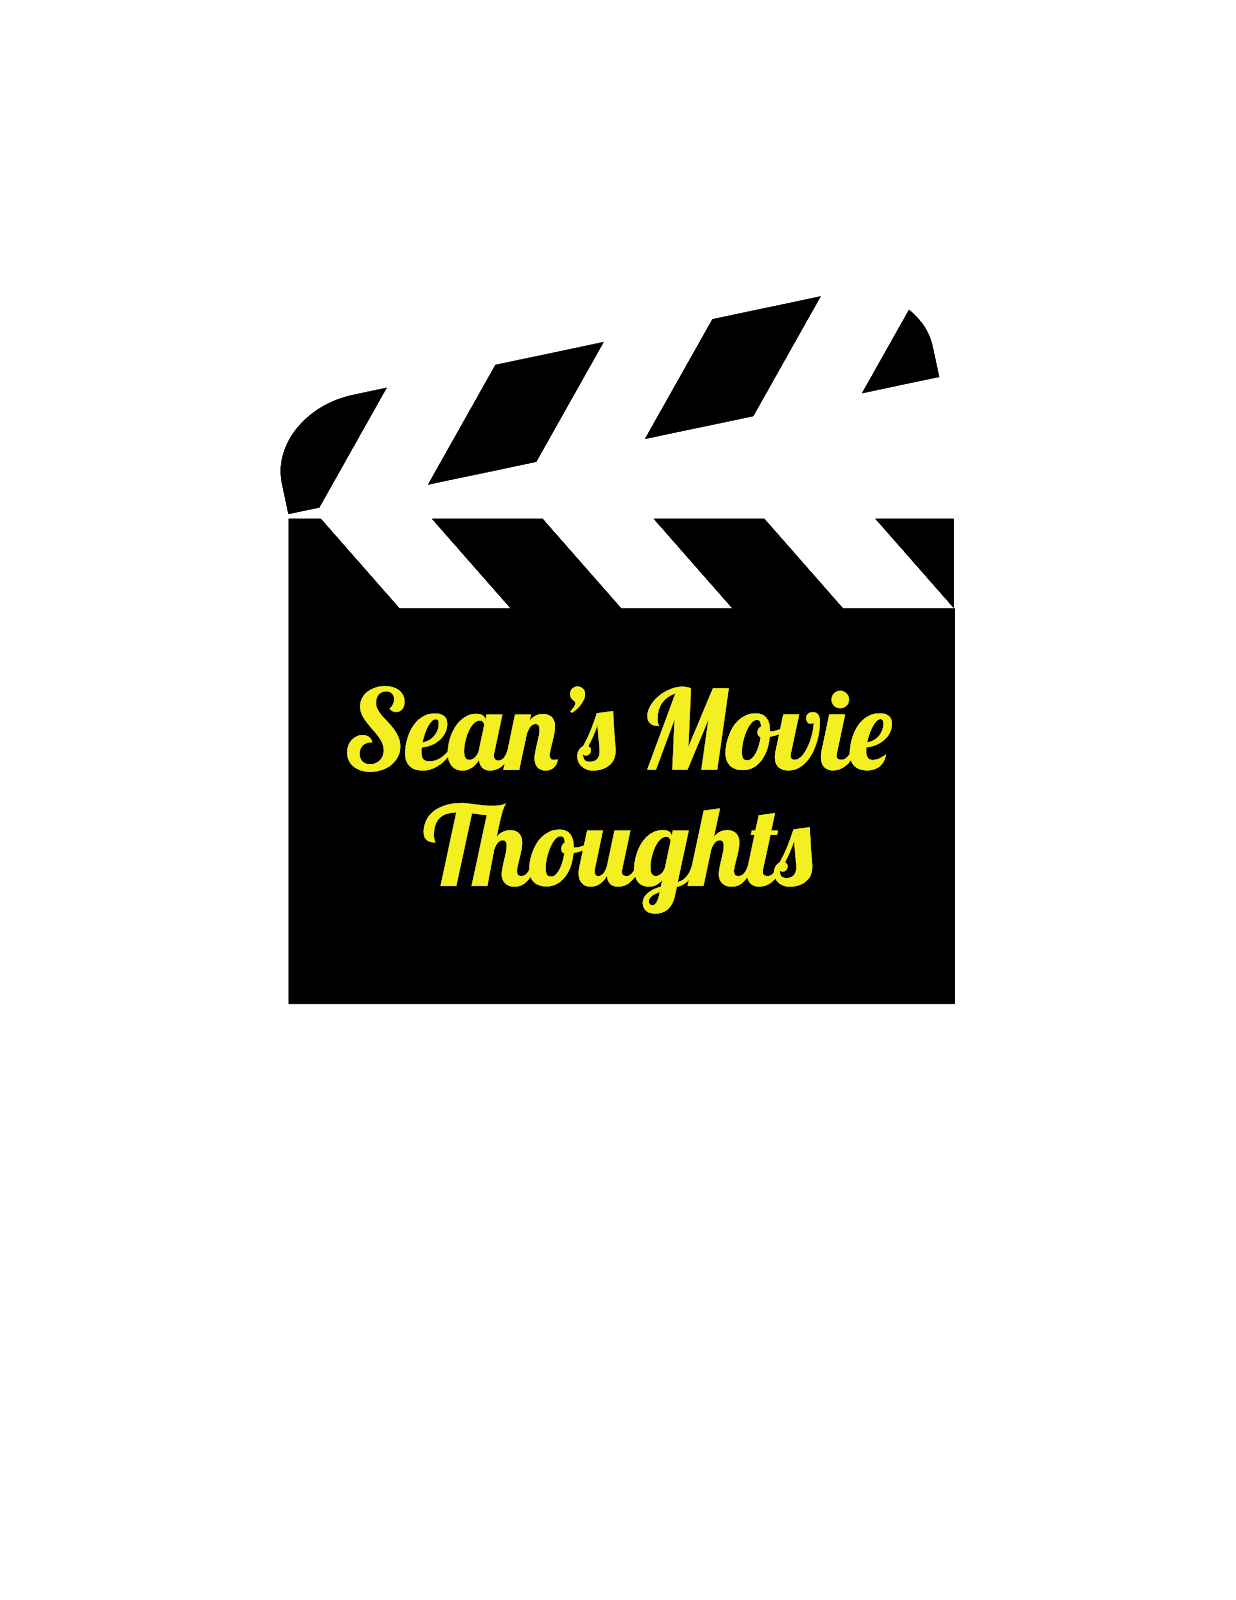 Sean’s movie thoughts